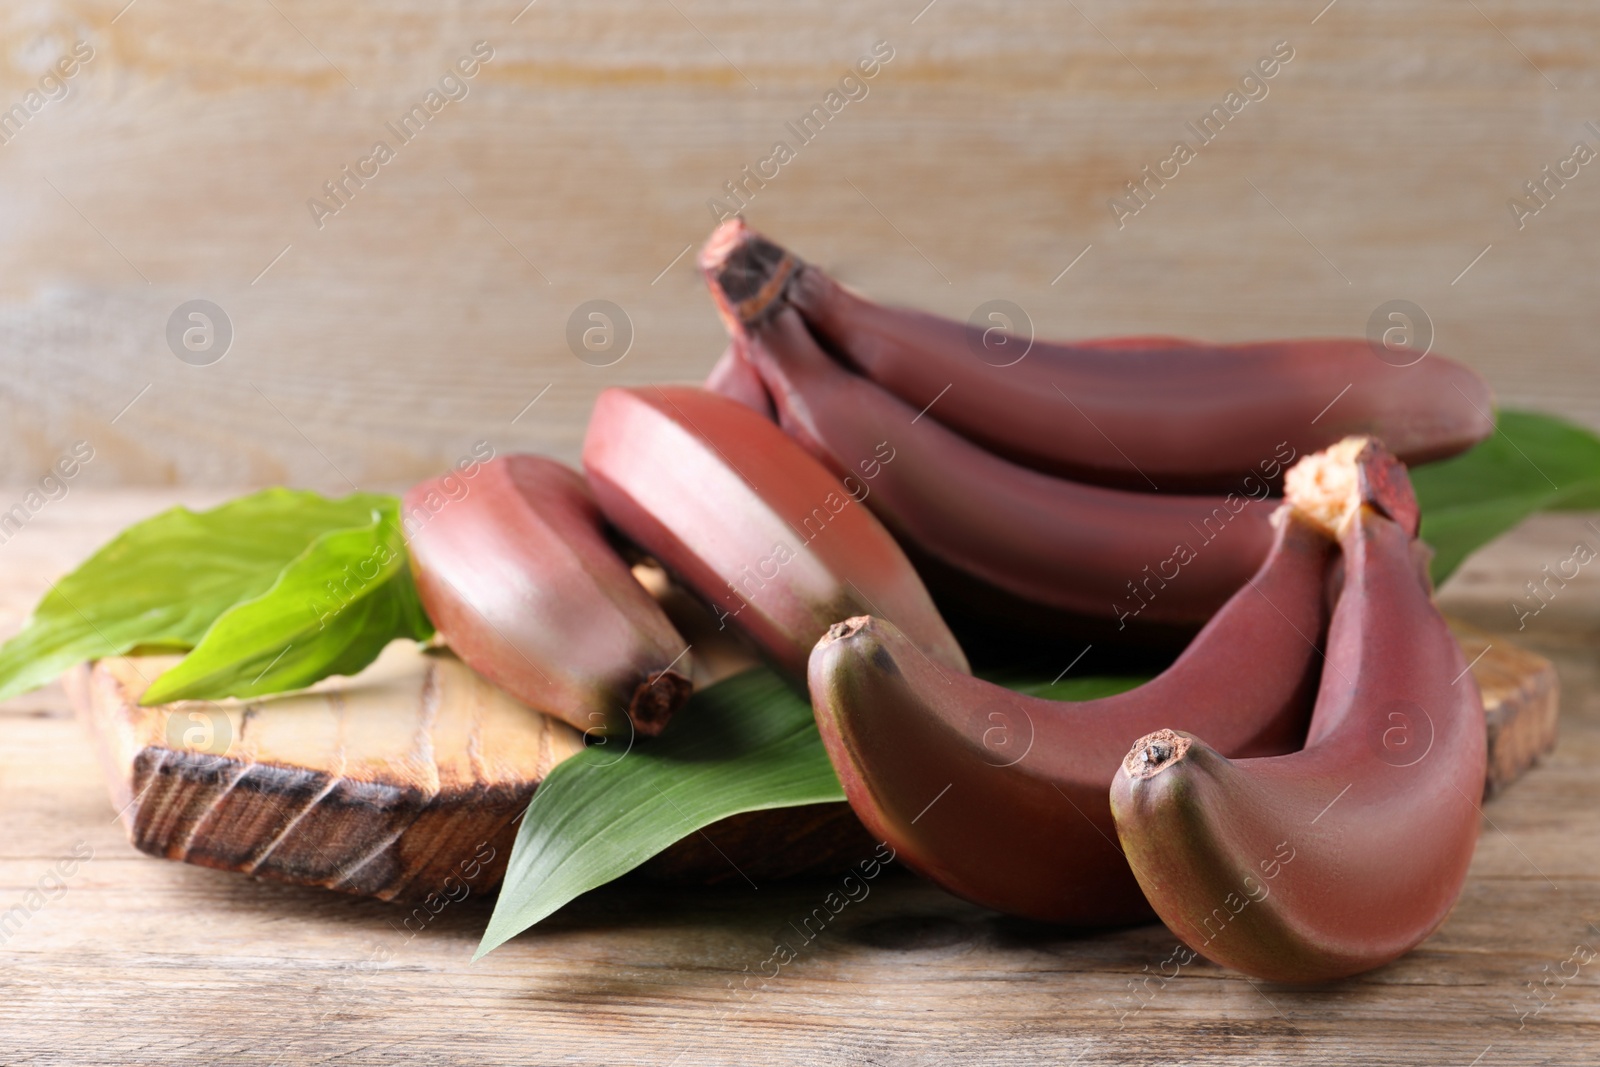 Photo of Delicious red baby bananas on wooden table